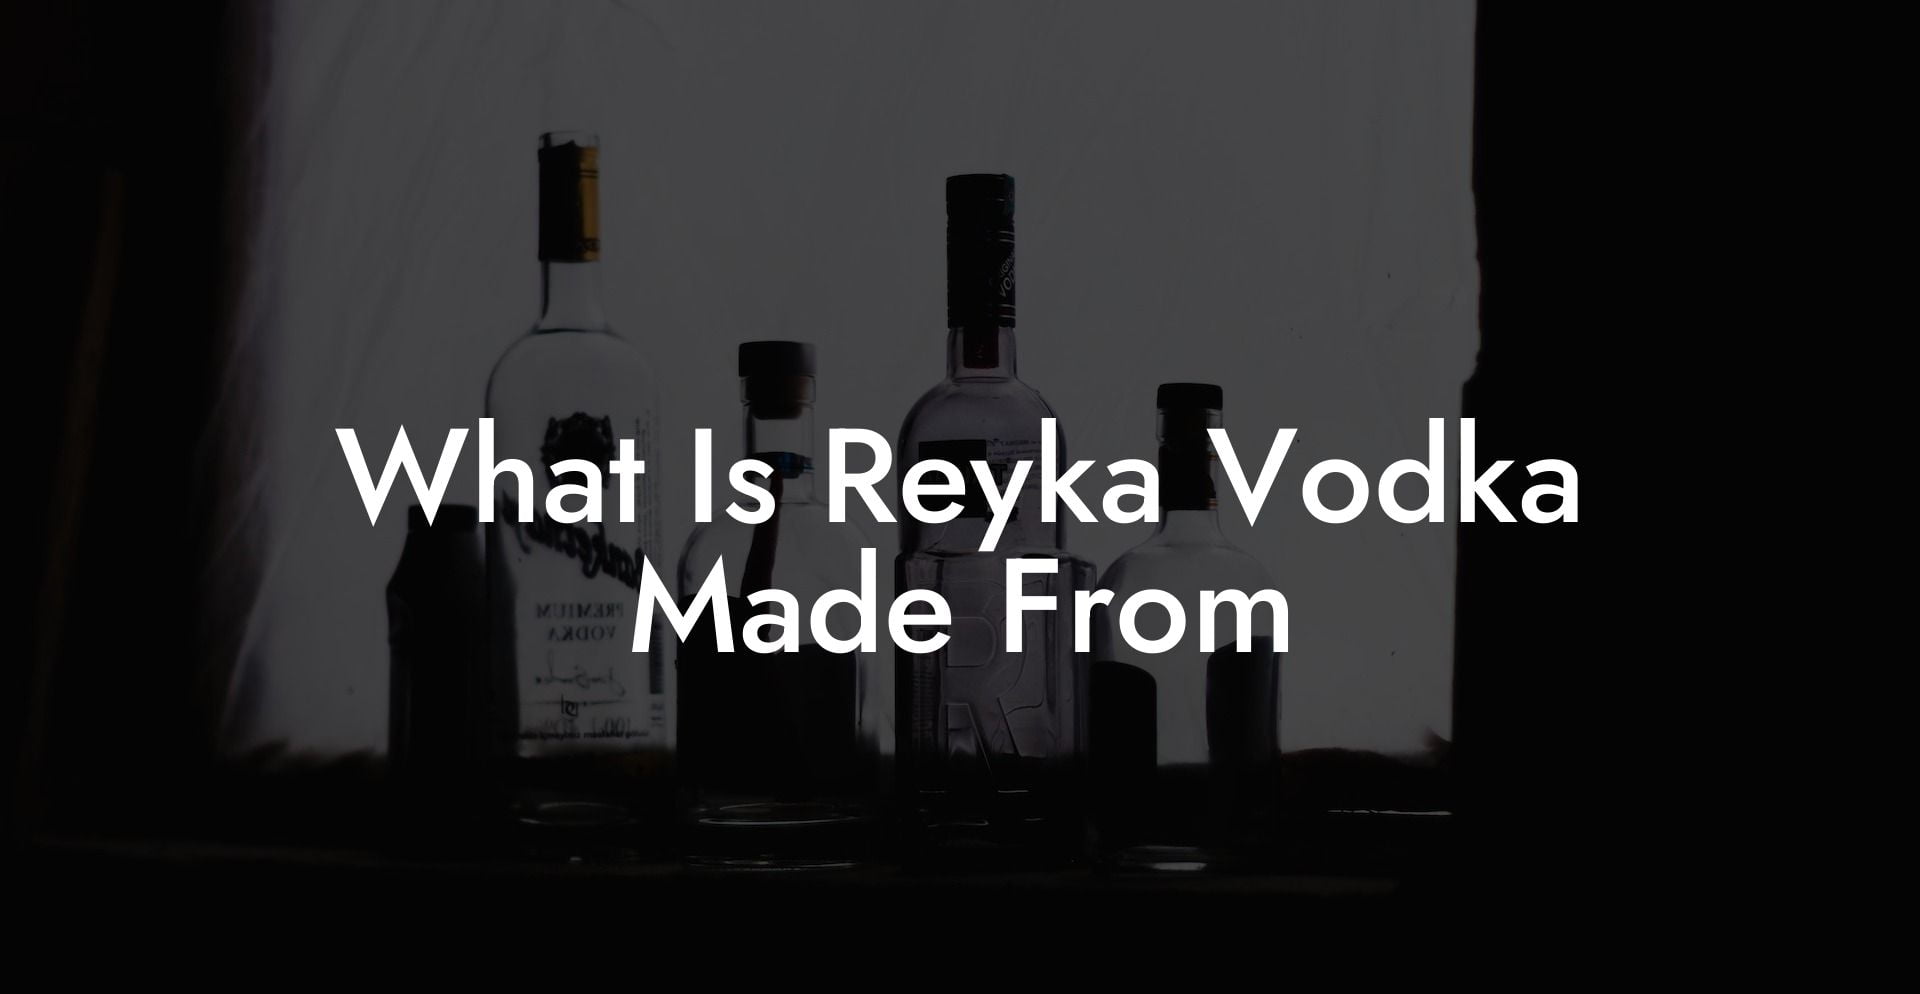 What Is Reyka Vodka Made From